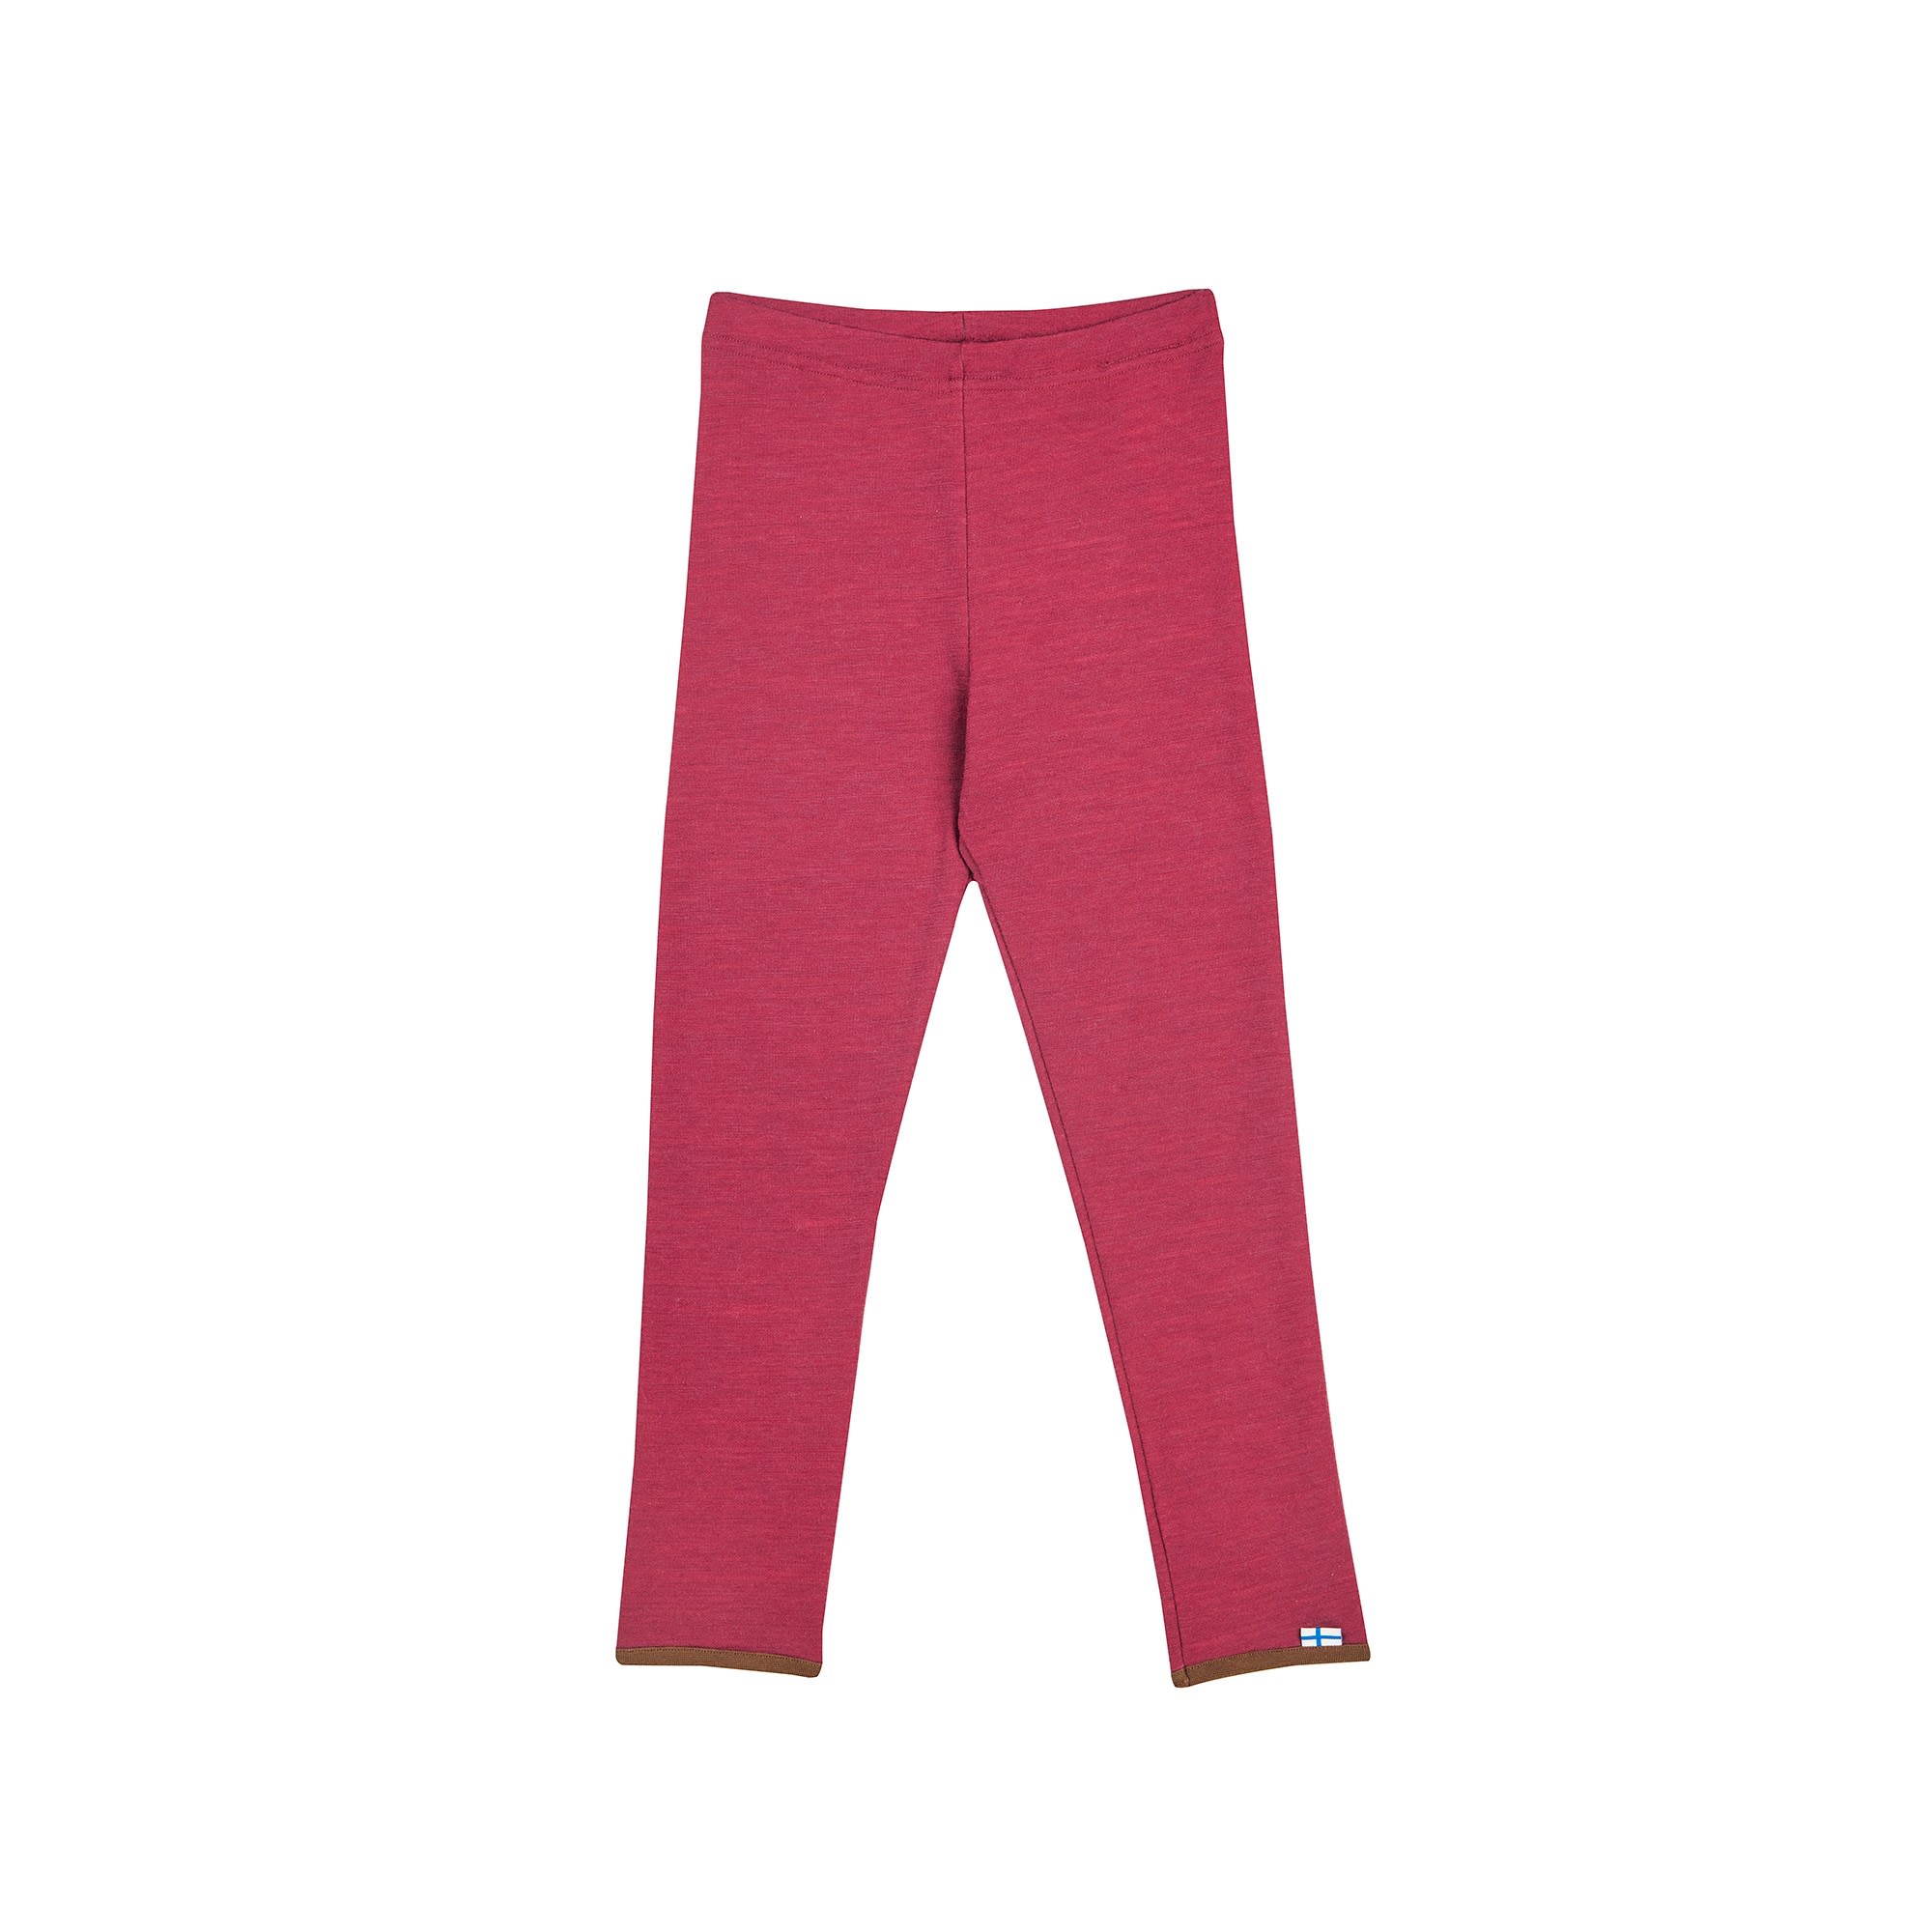 Finkid Warme weiche Kinder Wolljersey Leggings Beet Red - Cocoa